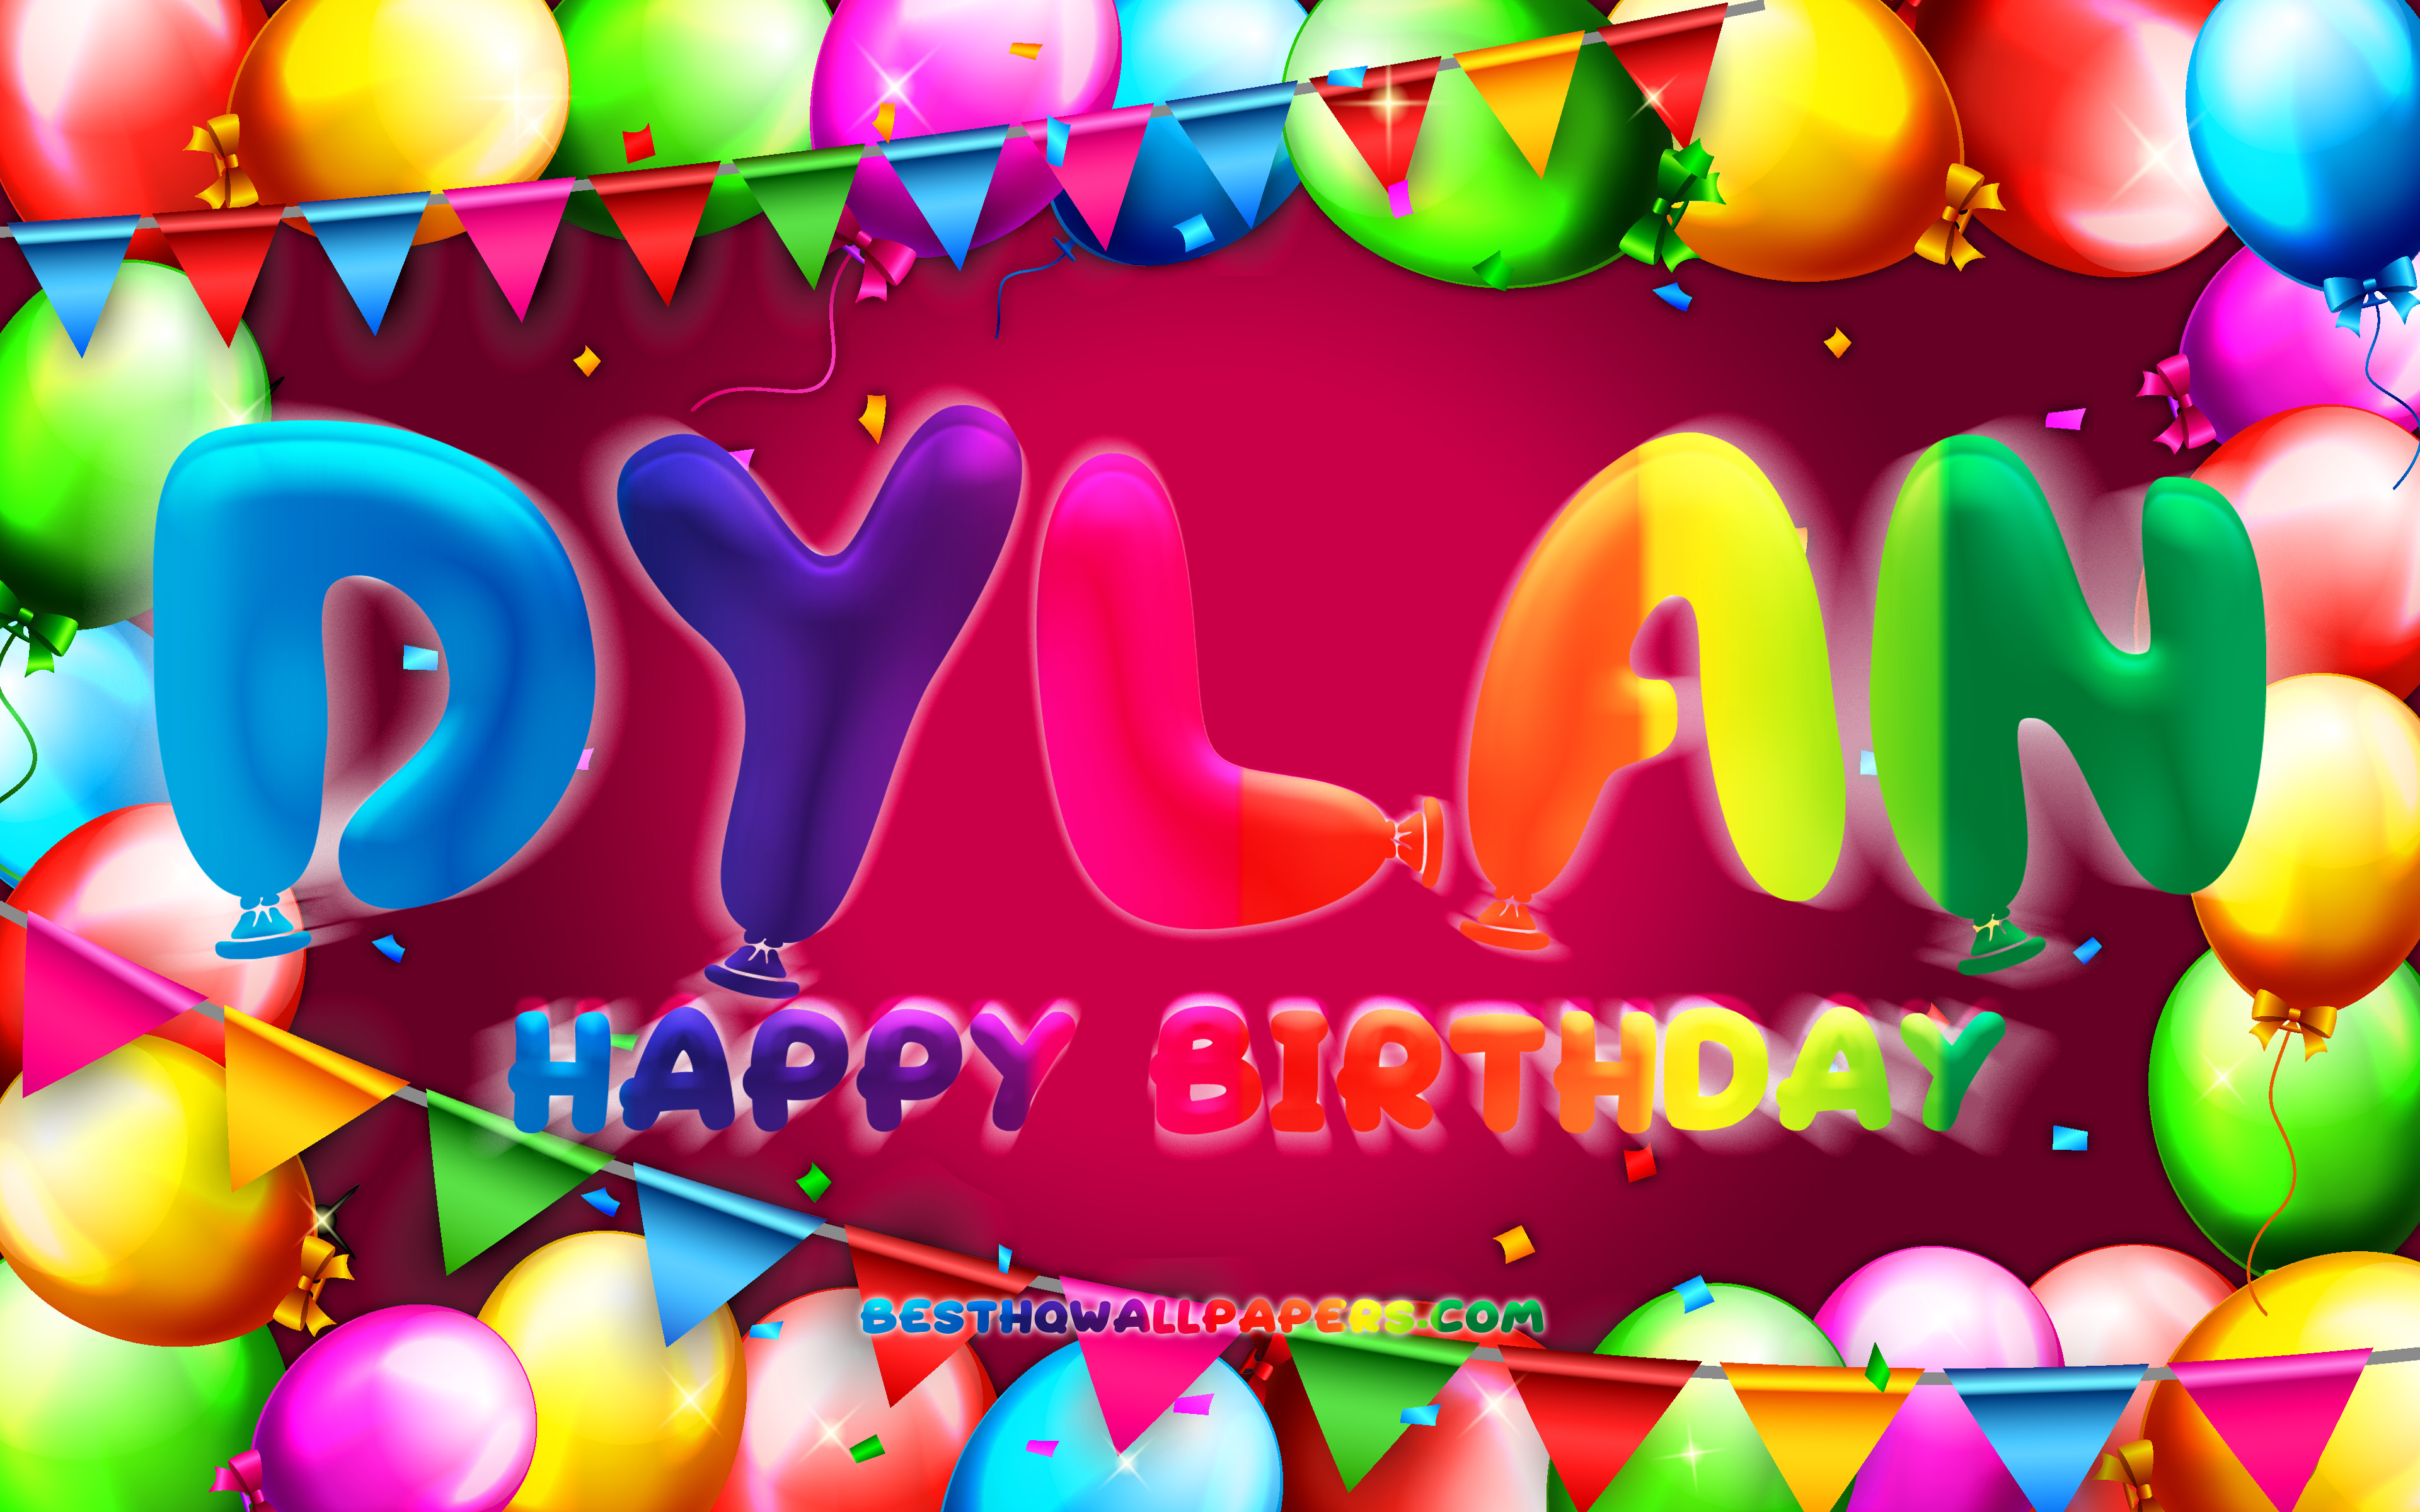 Download Wallpapers Happy Birthday Dylan 4k Colorful Balloon Frame Dylan Name Purple Background Dylan Happy Birthday Dylan Birthday Popular American Female Names Birthday Concept Dylan For Desktop With Resolution 3840x2400 High Quality